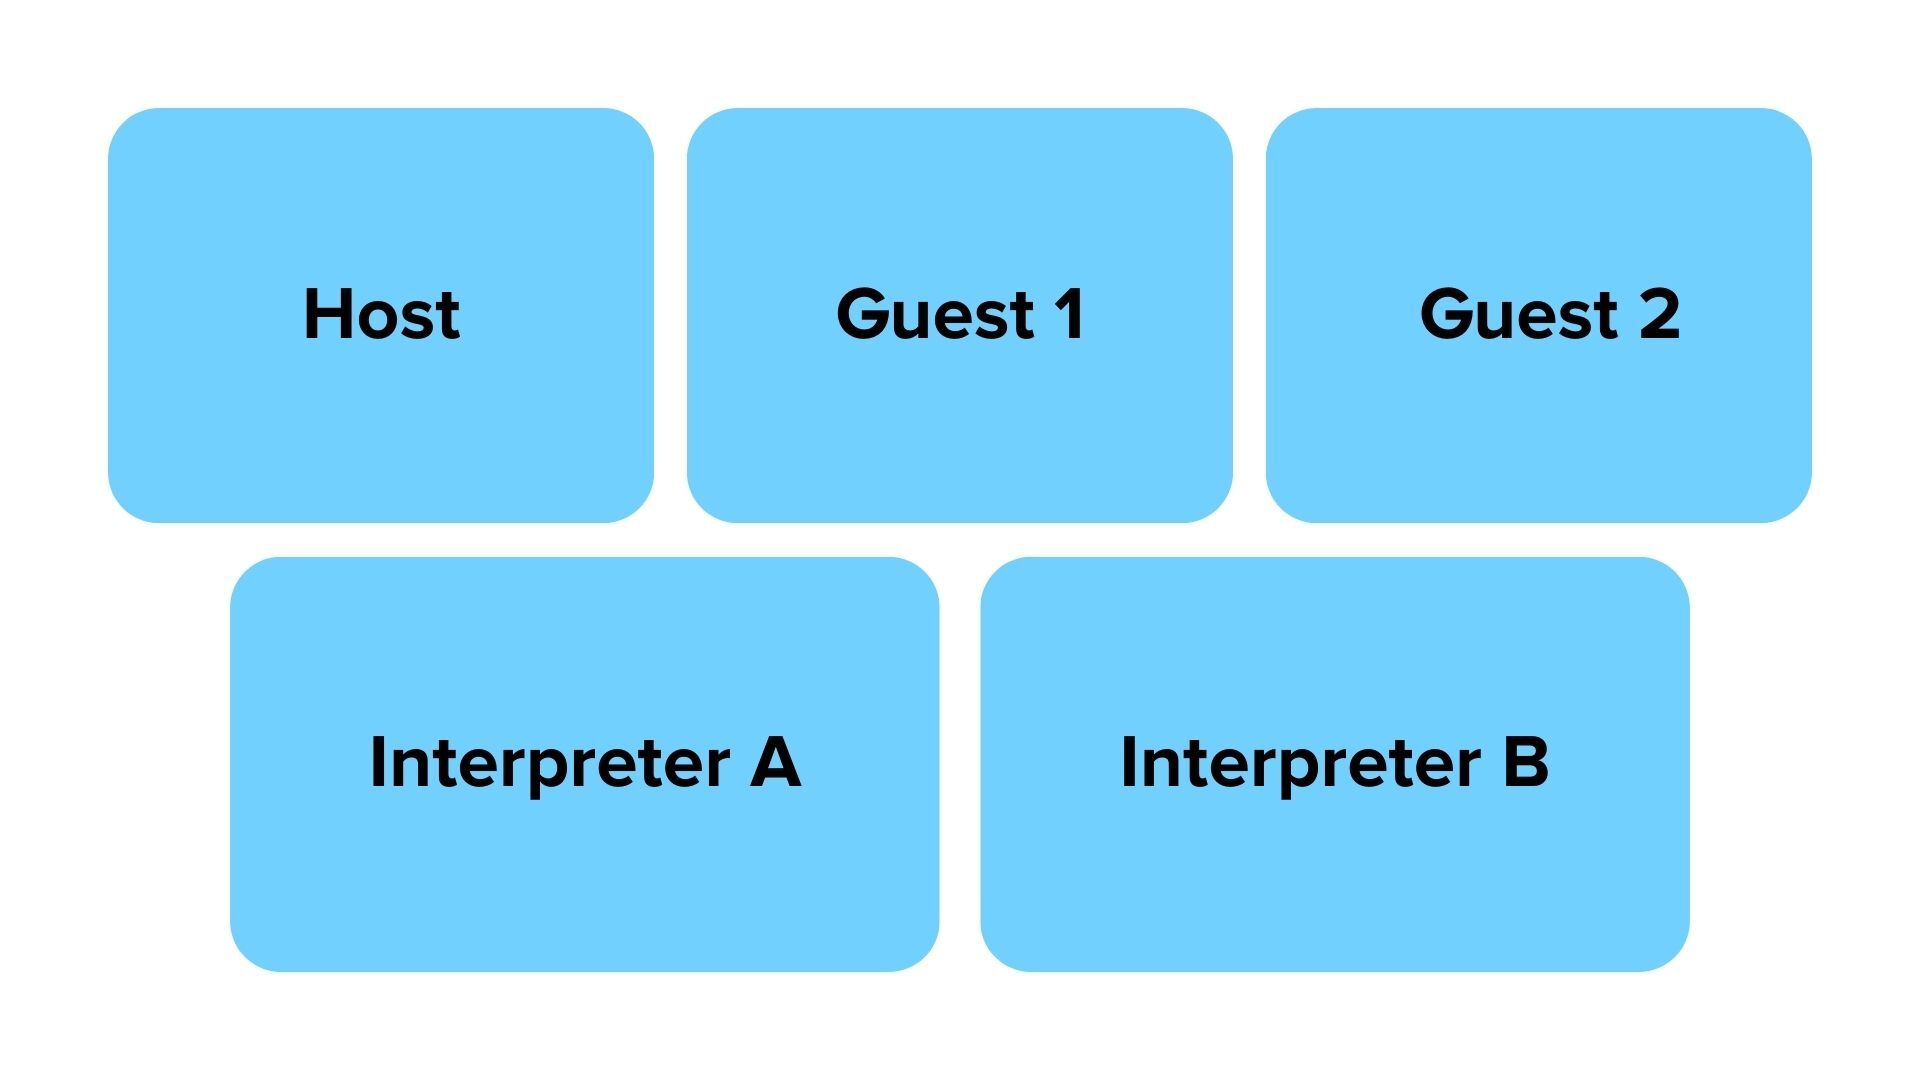 Visual layout for the interview portion of the Zoom session. On the top are three squares for the host, guest 1, and guest 2. On the bottom are two squares for interpreters A & B. 